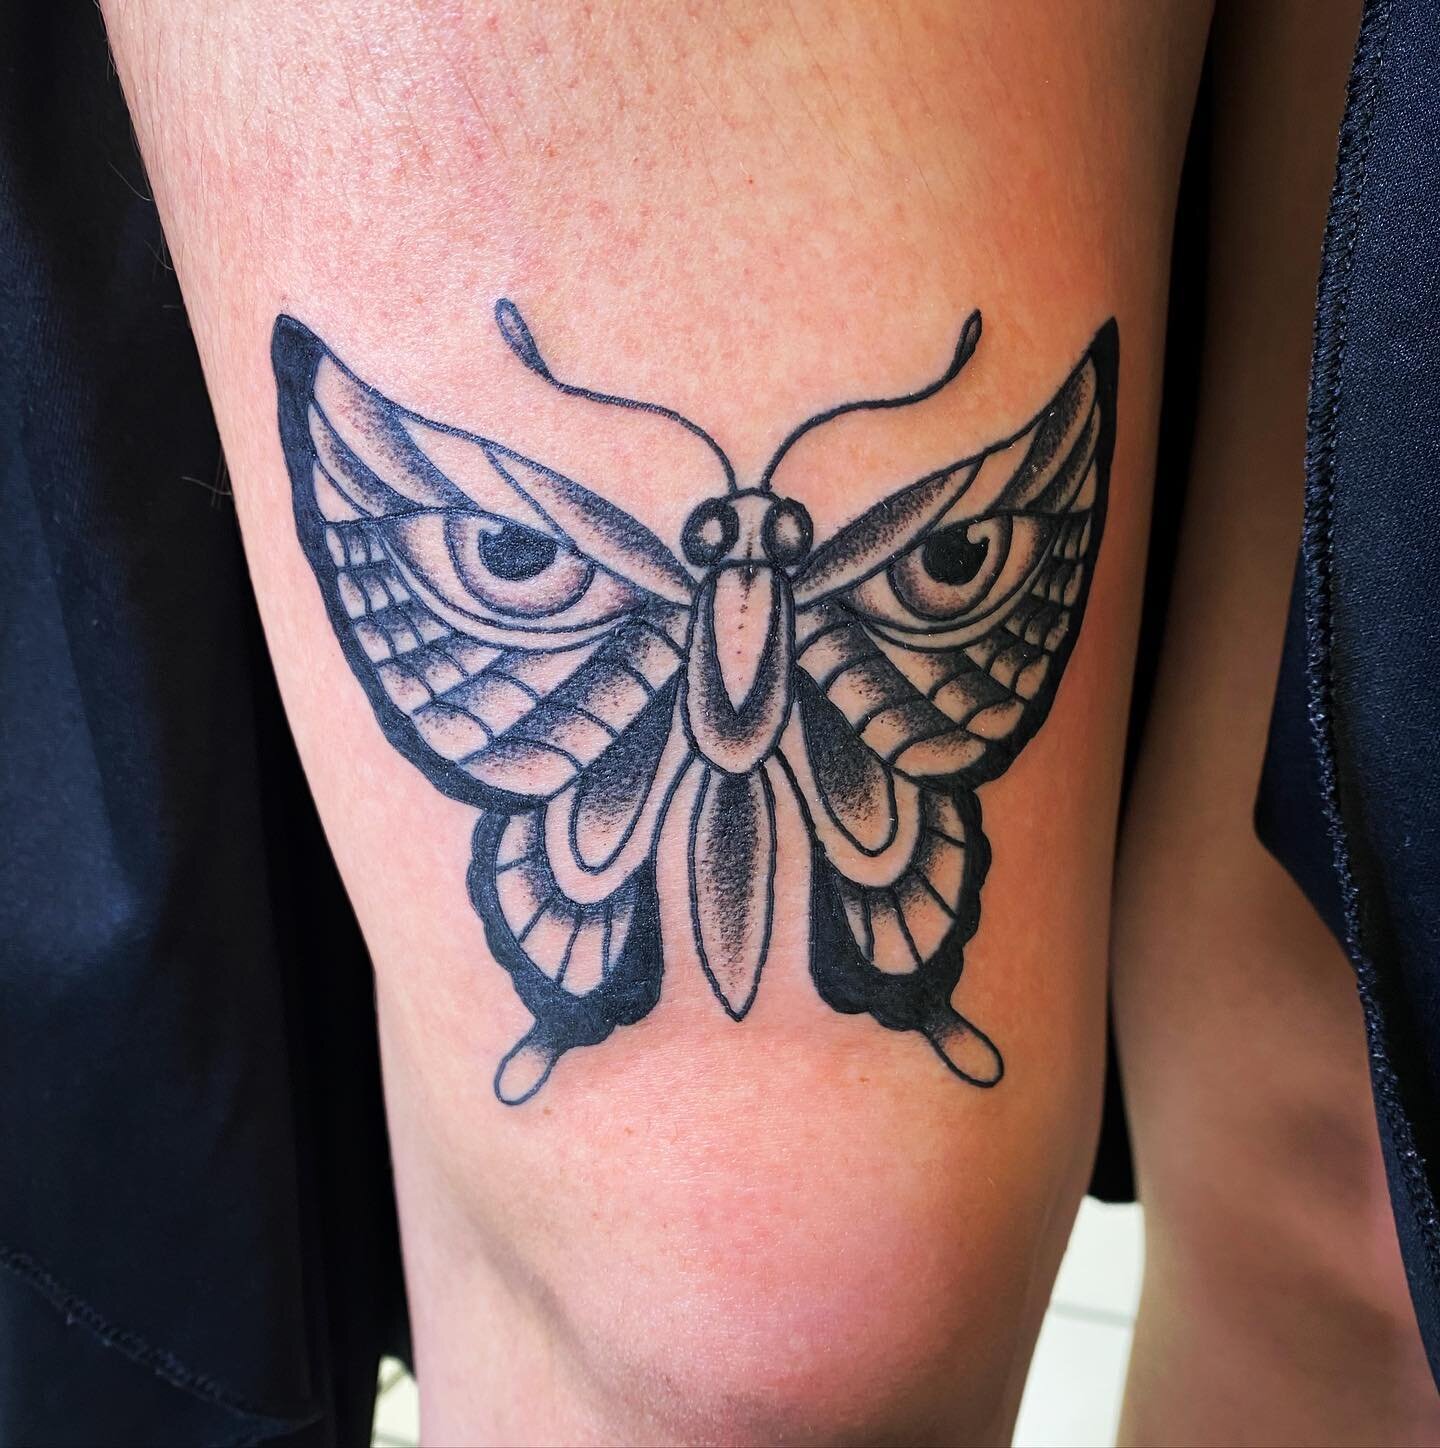 Flash Day #butterfly by @pete1gilcrease ! We are so grateful to have Pete at Classic. We&rsquo;ve been longtime fans of his throughout his career in Austin, now he&rsquo;s part of the Classic roster and we couldn&rsquo;t be more thrilled. &hearts;️